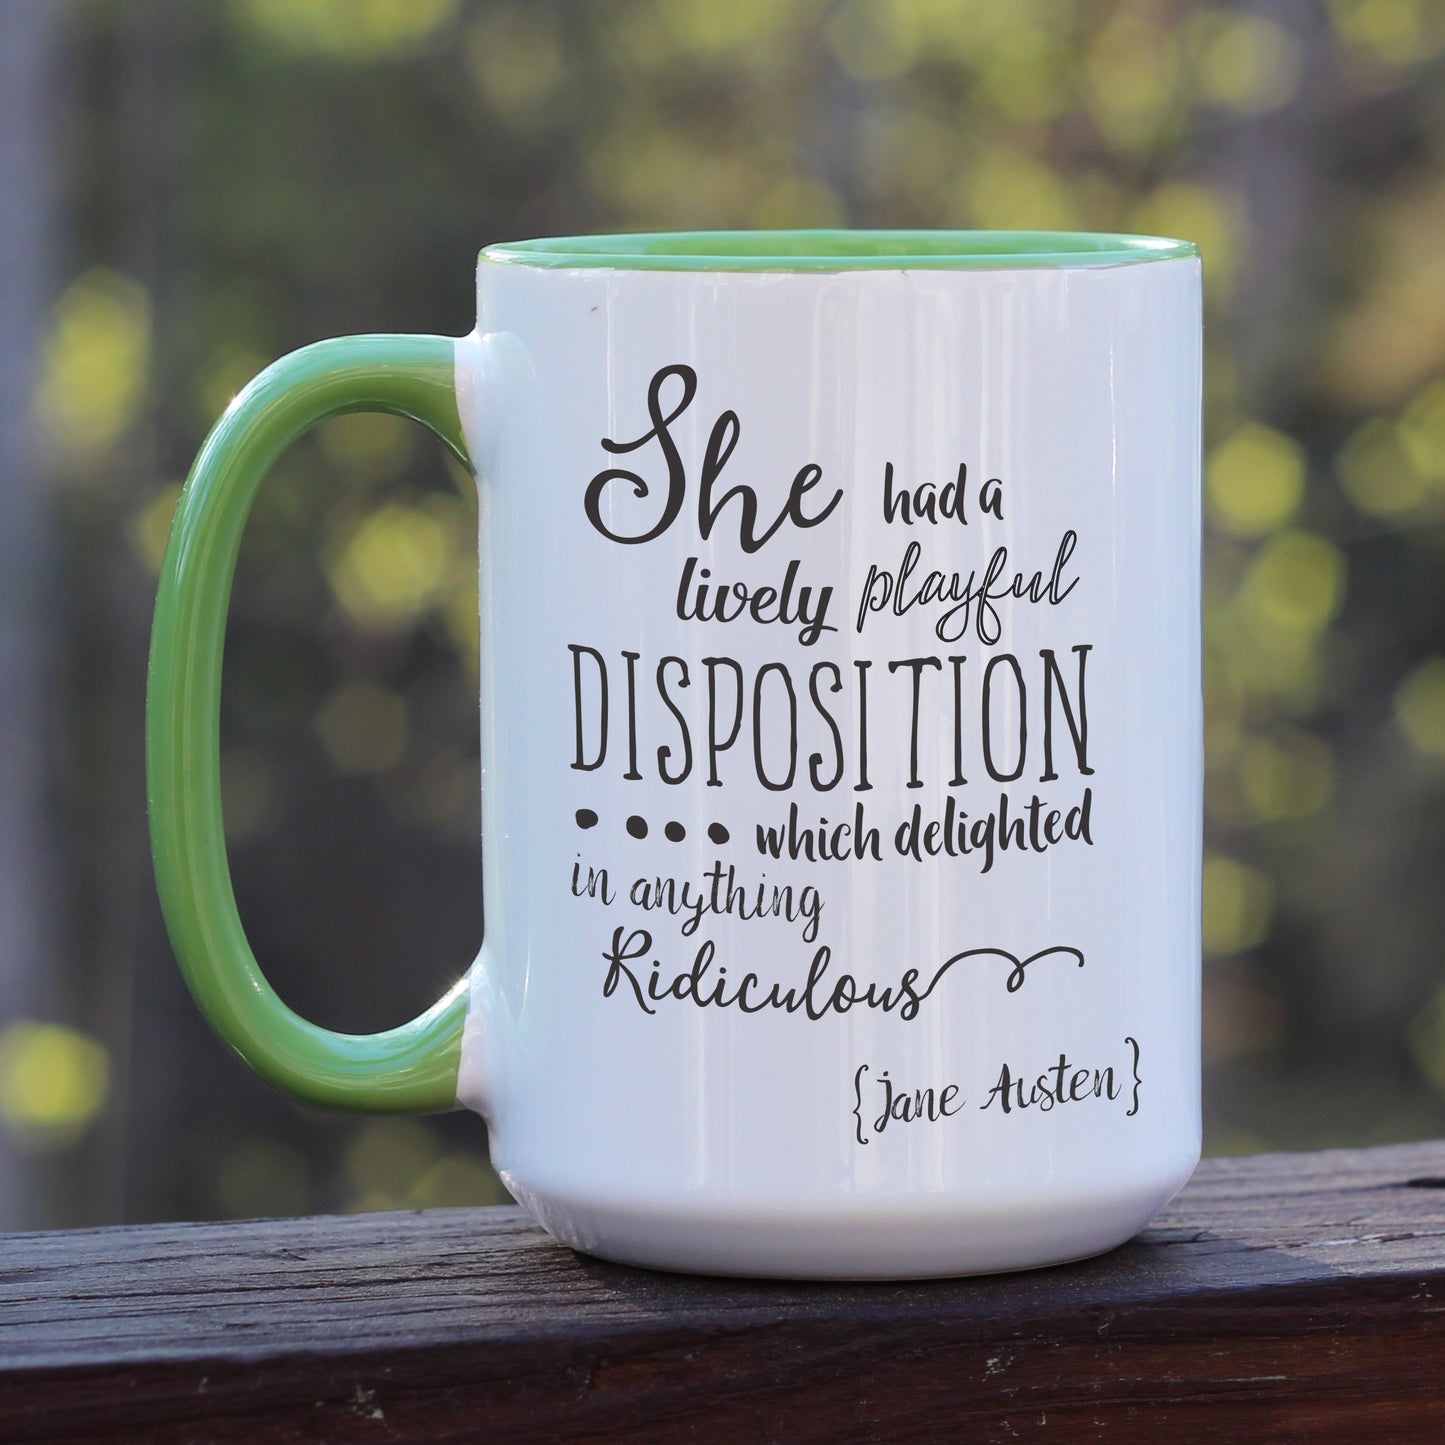 Jane Austen Pride and Prejudice quote white coffee mug with green handle.